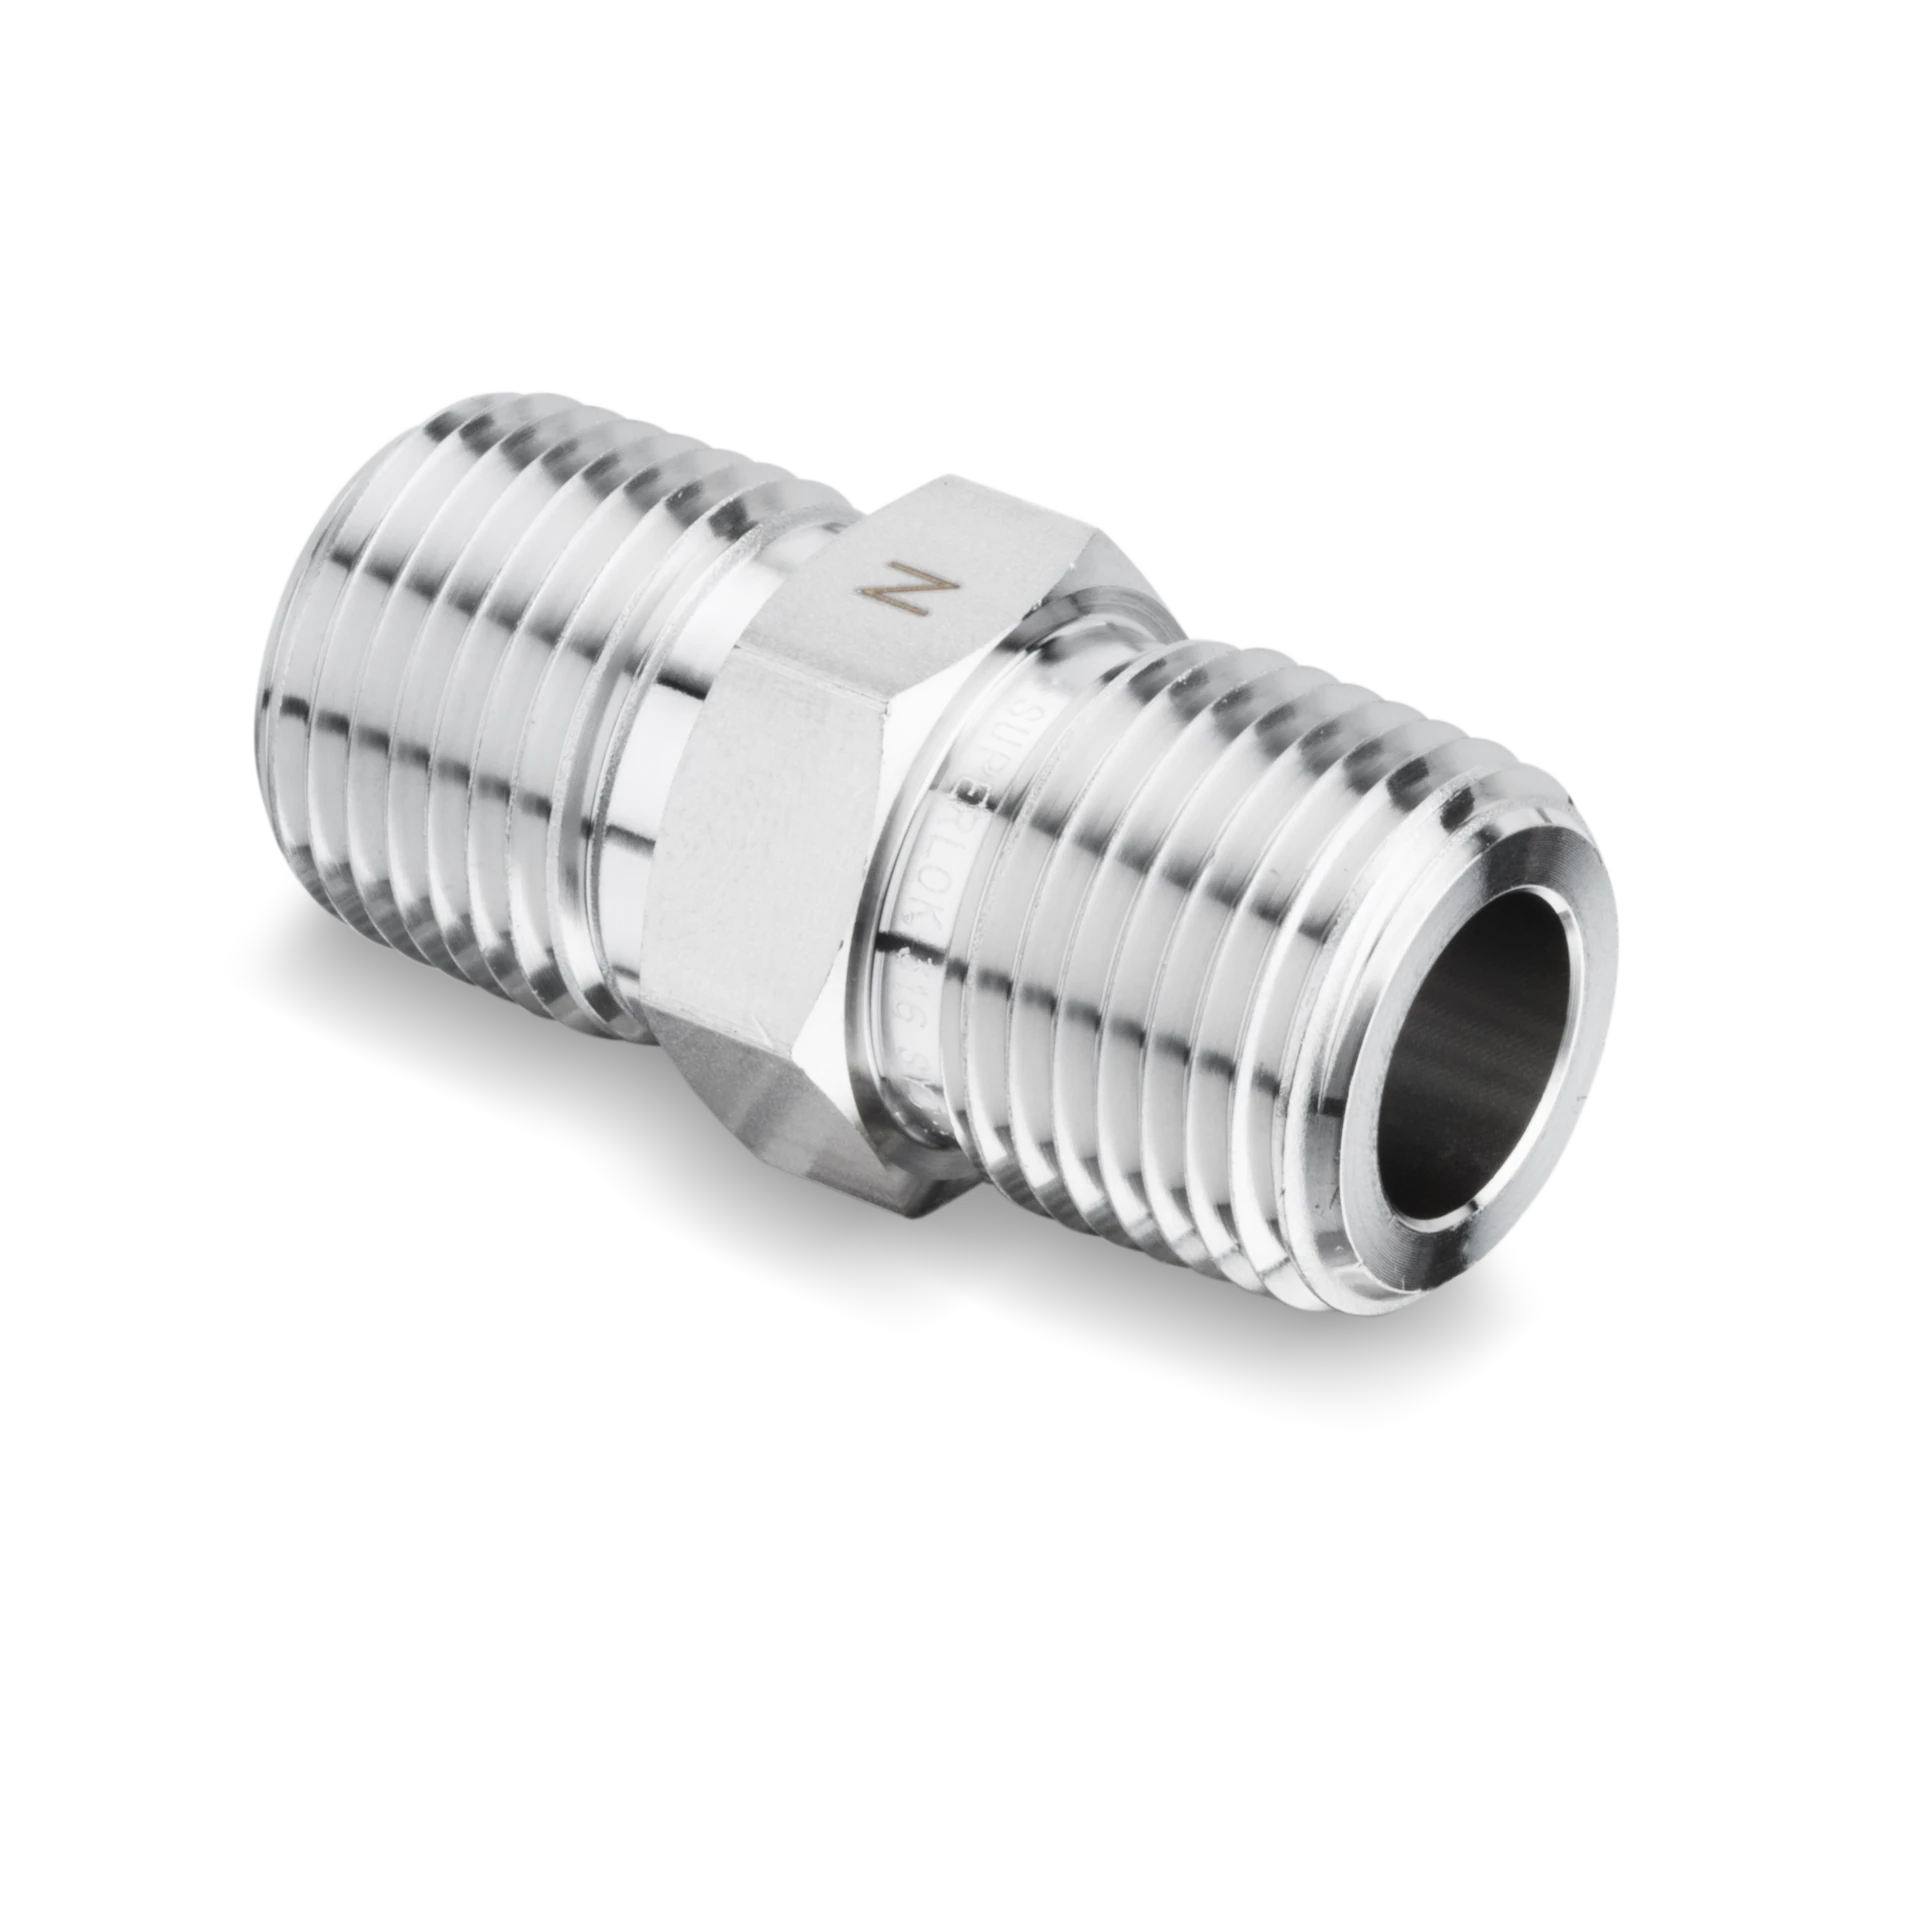 IHN PIPE FITTING